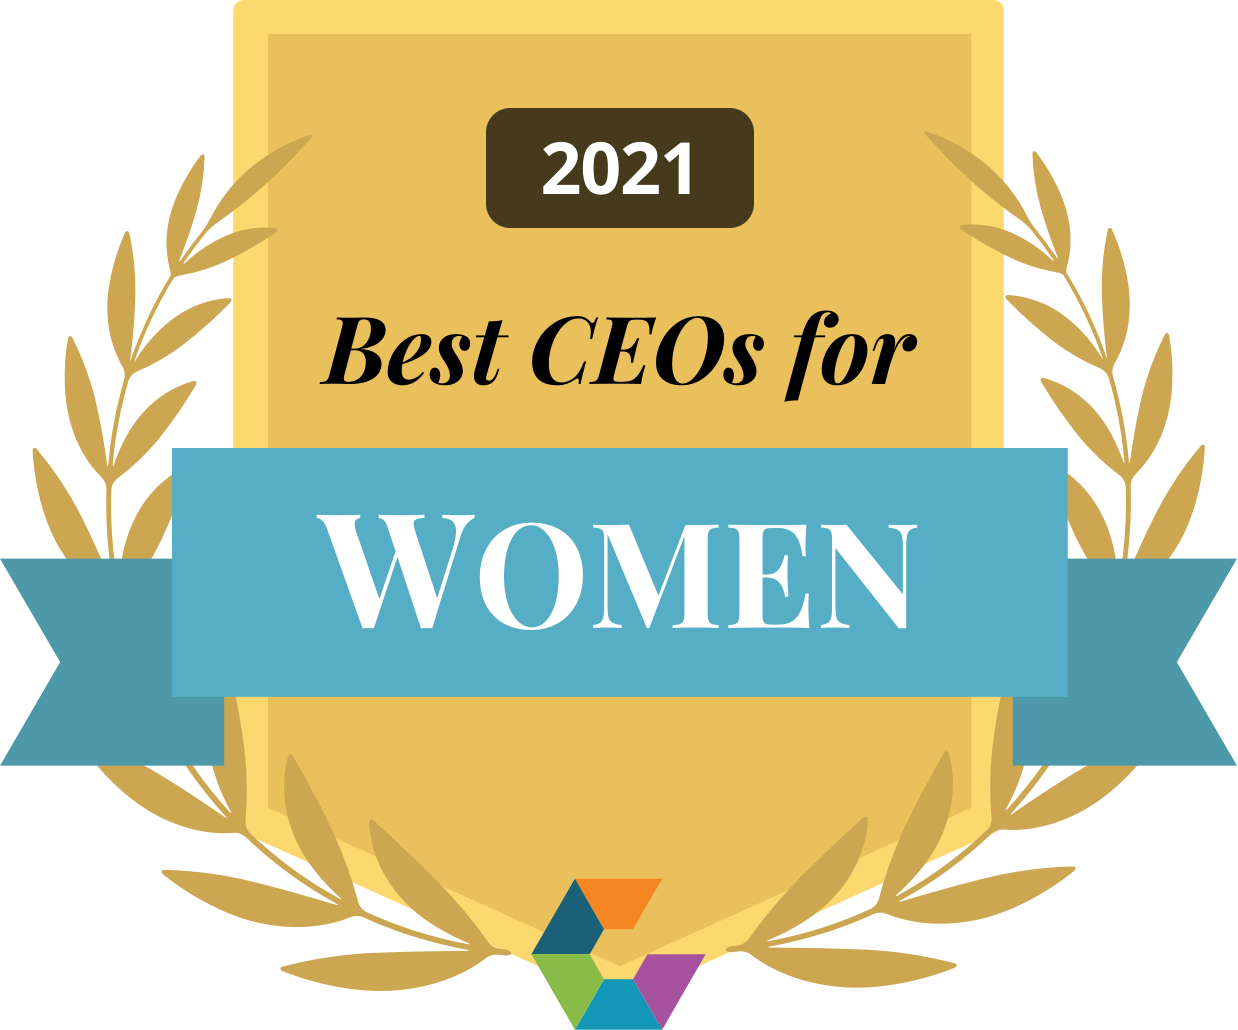 Comparably Award | Best CEO for Women 2021 | Smartsheet